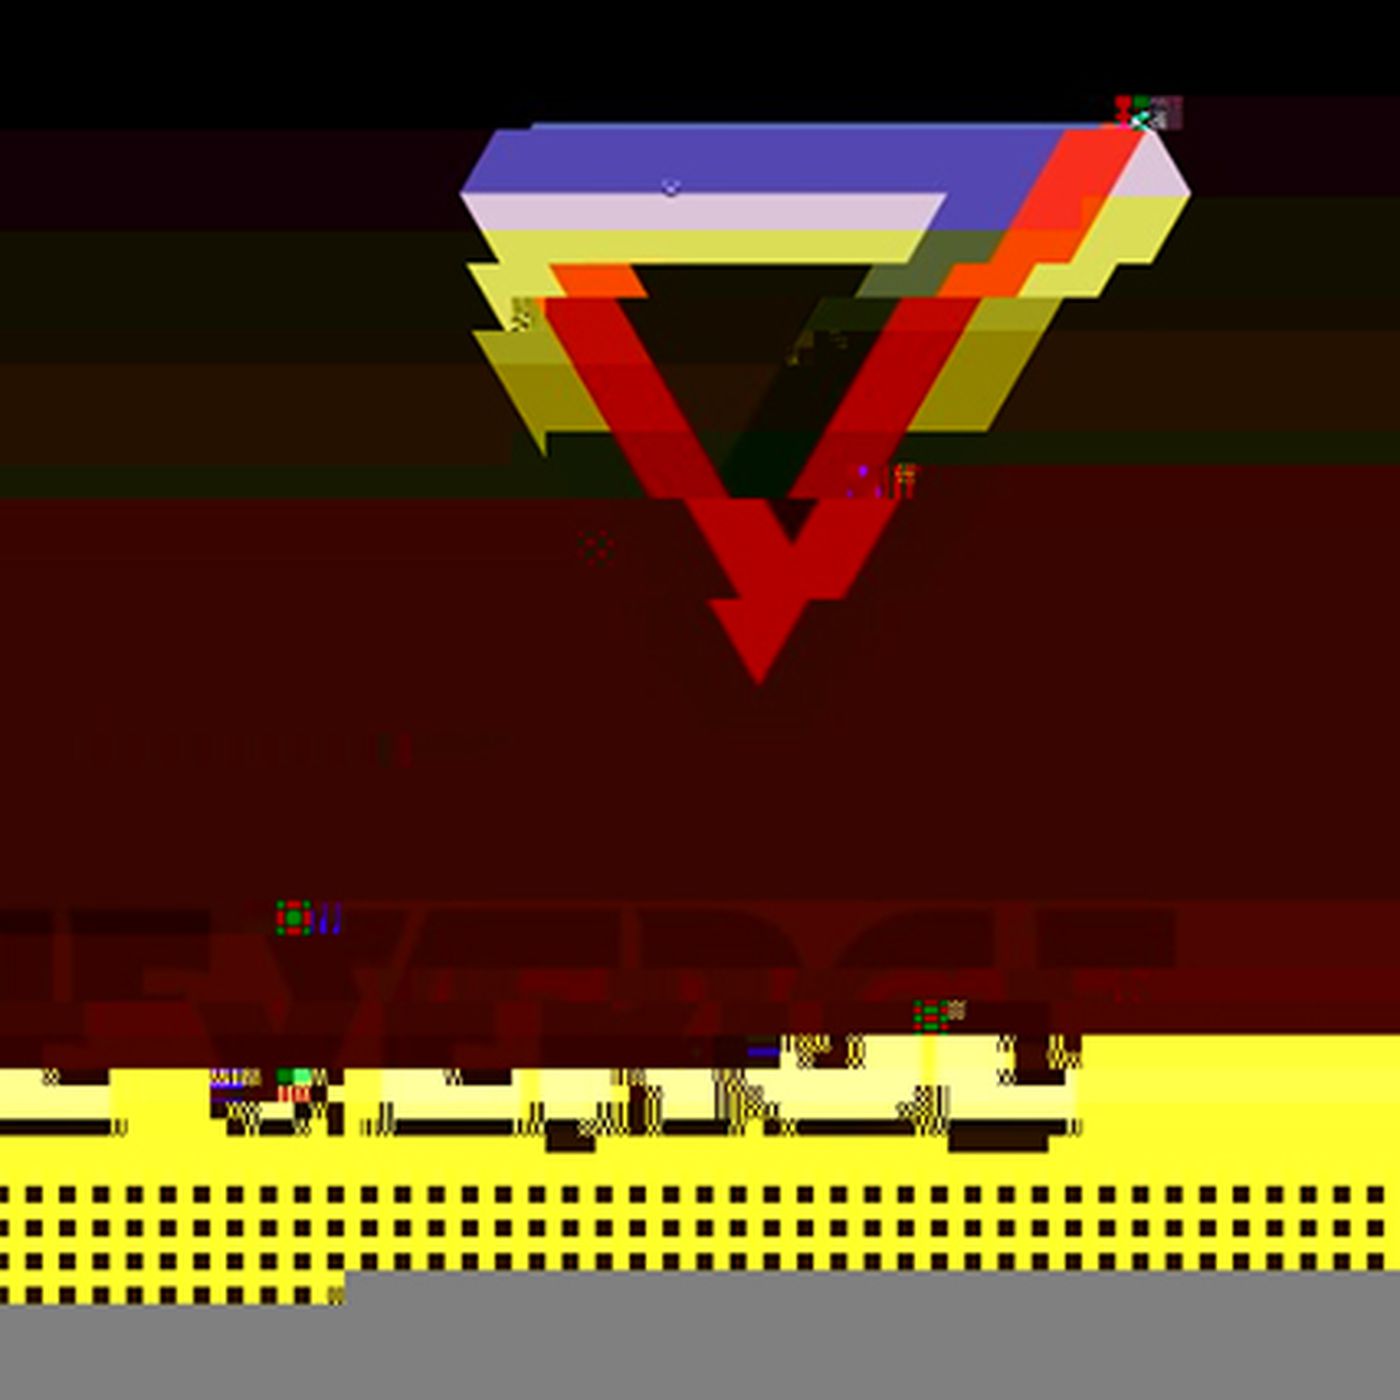 frost sympathy coupon Create your own glitch art in seconds - The Verge